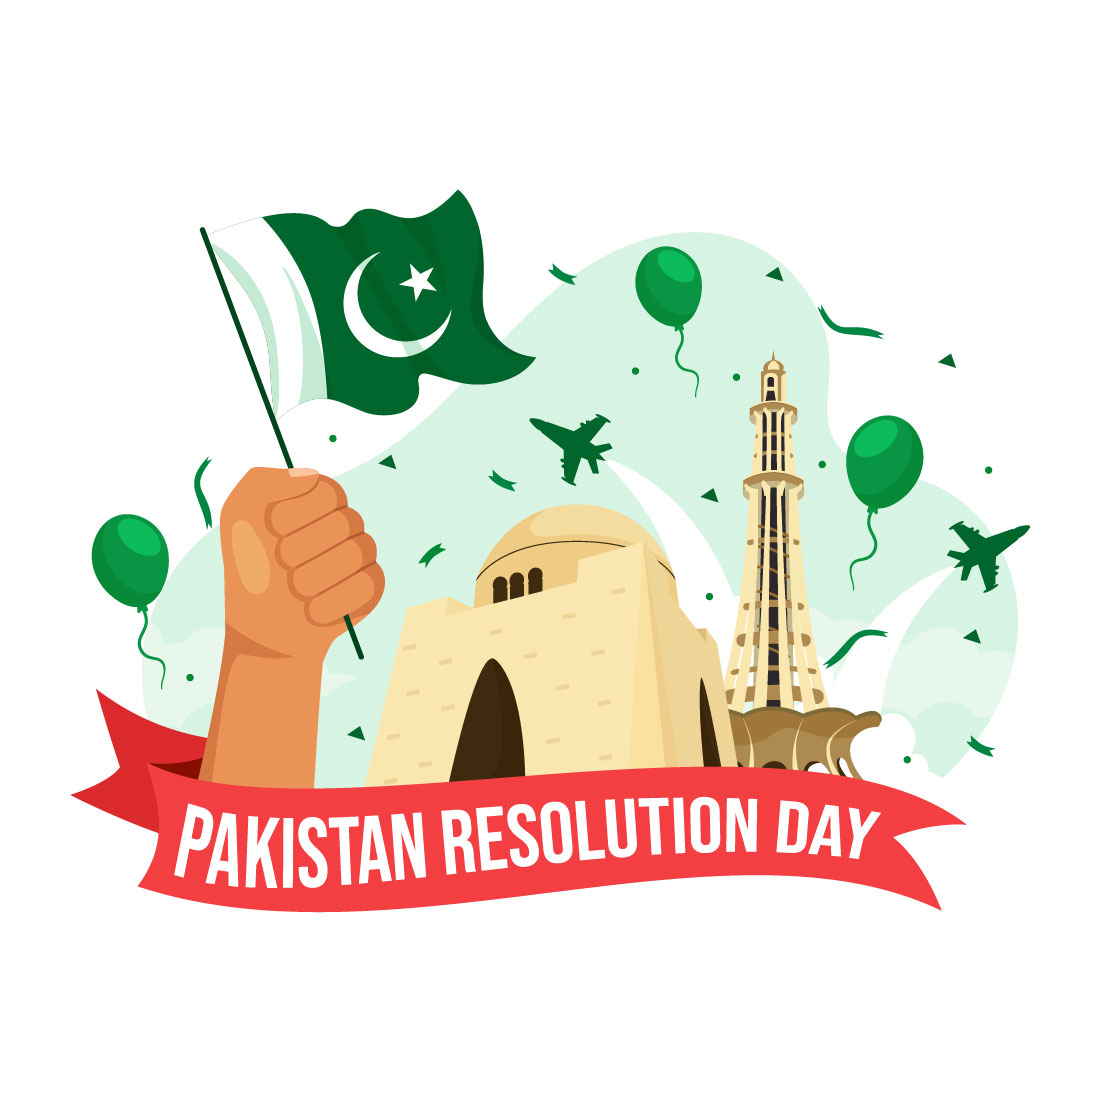 12 Pakistan Resolution Day Illustration cover image.